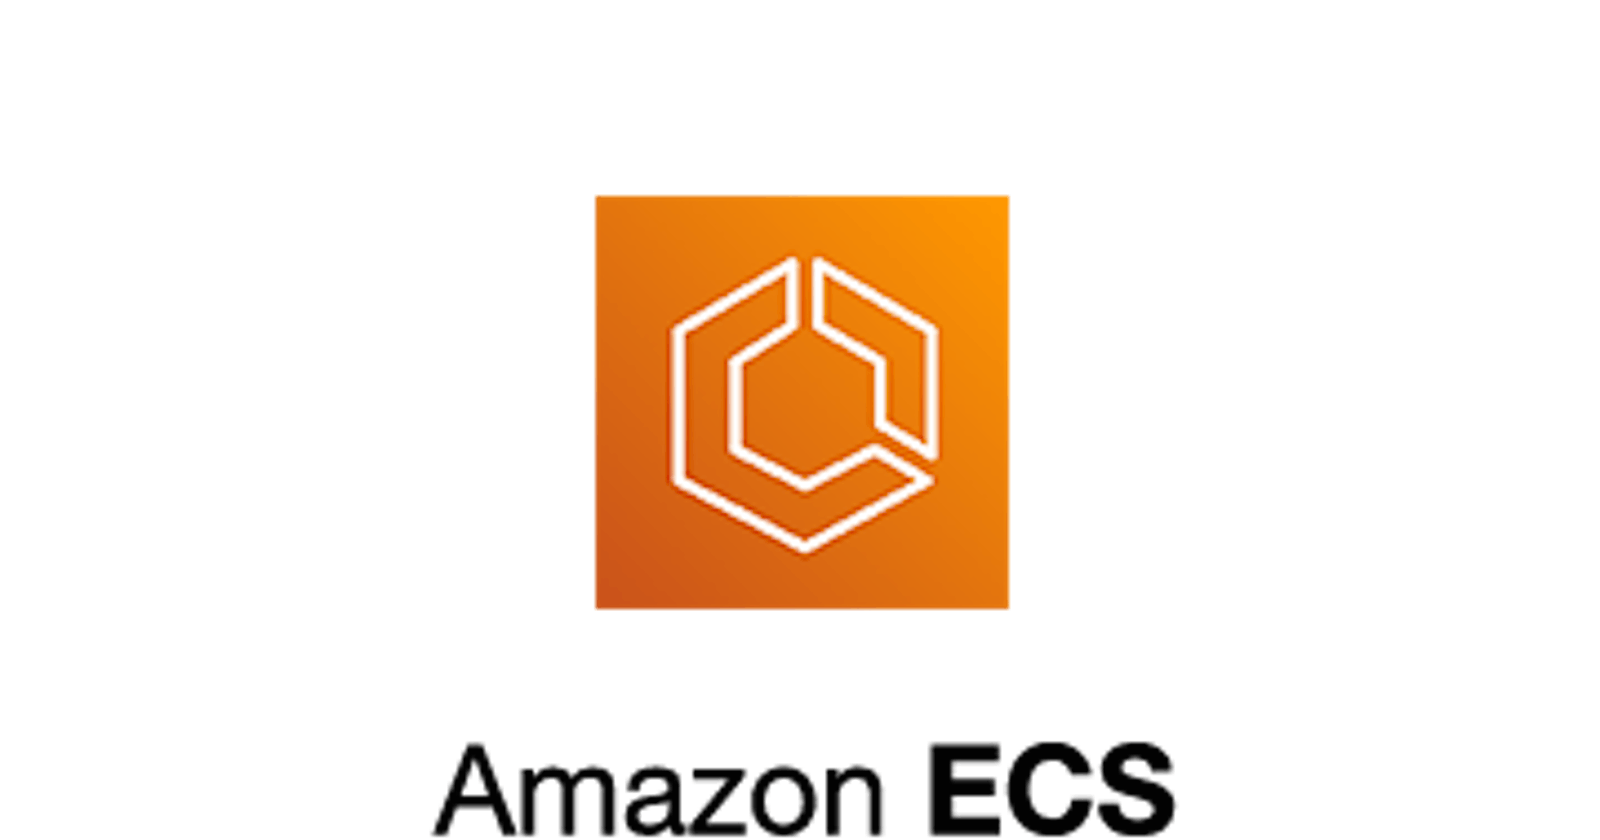 Docker Containers Management on AWS